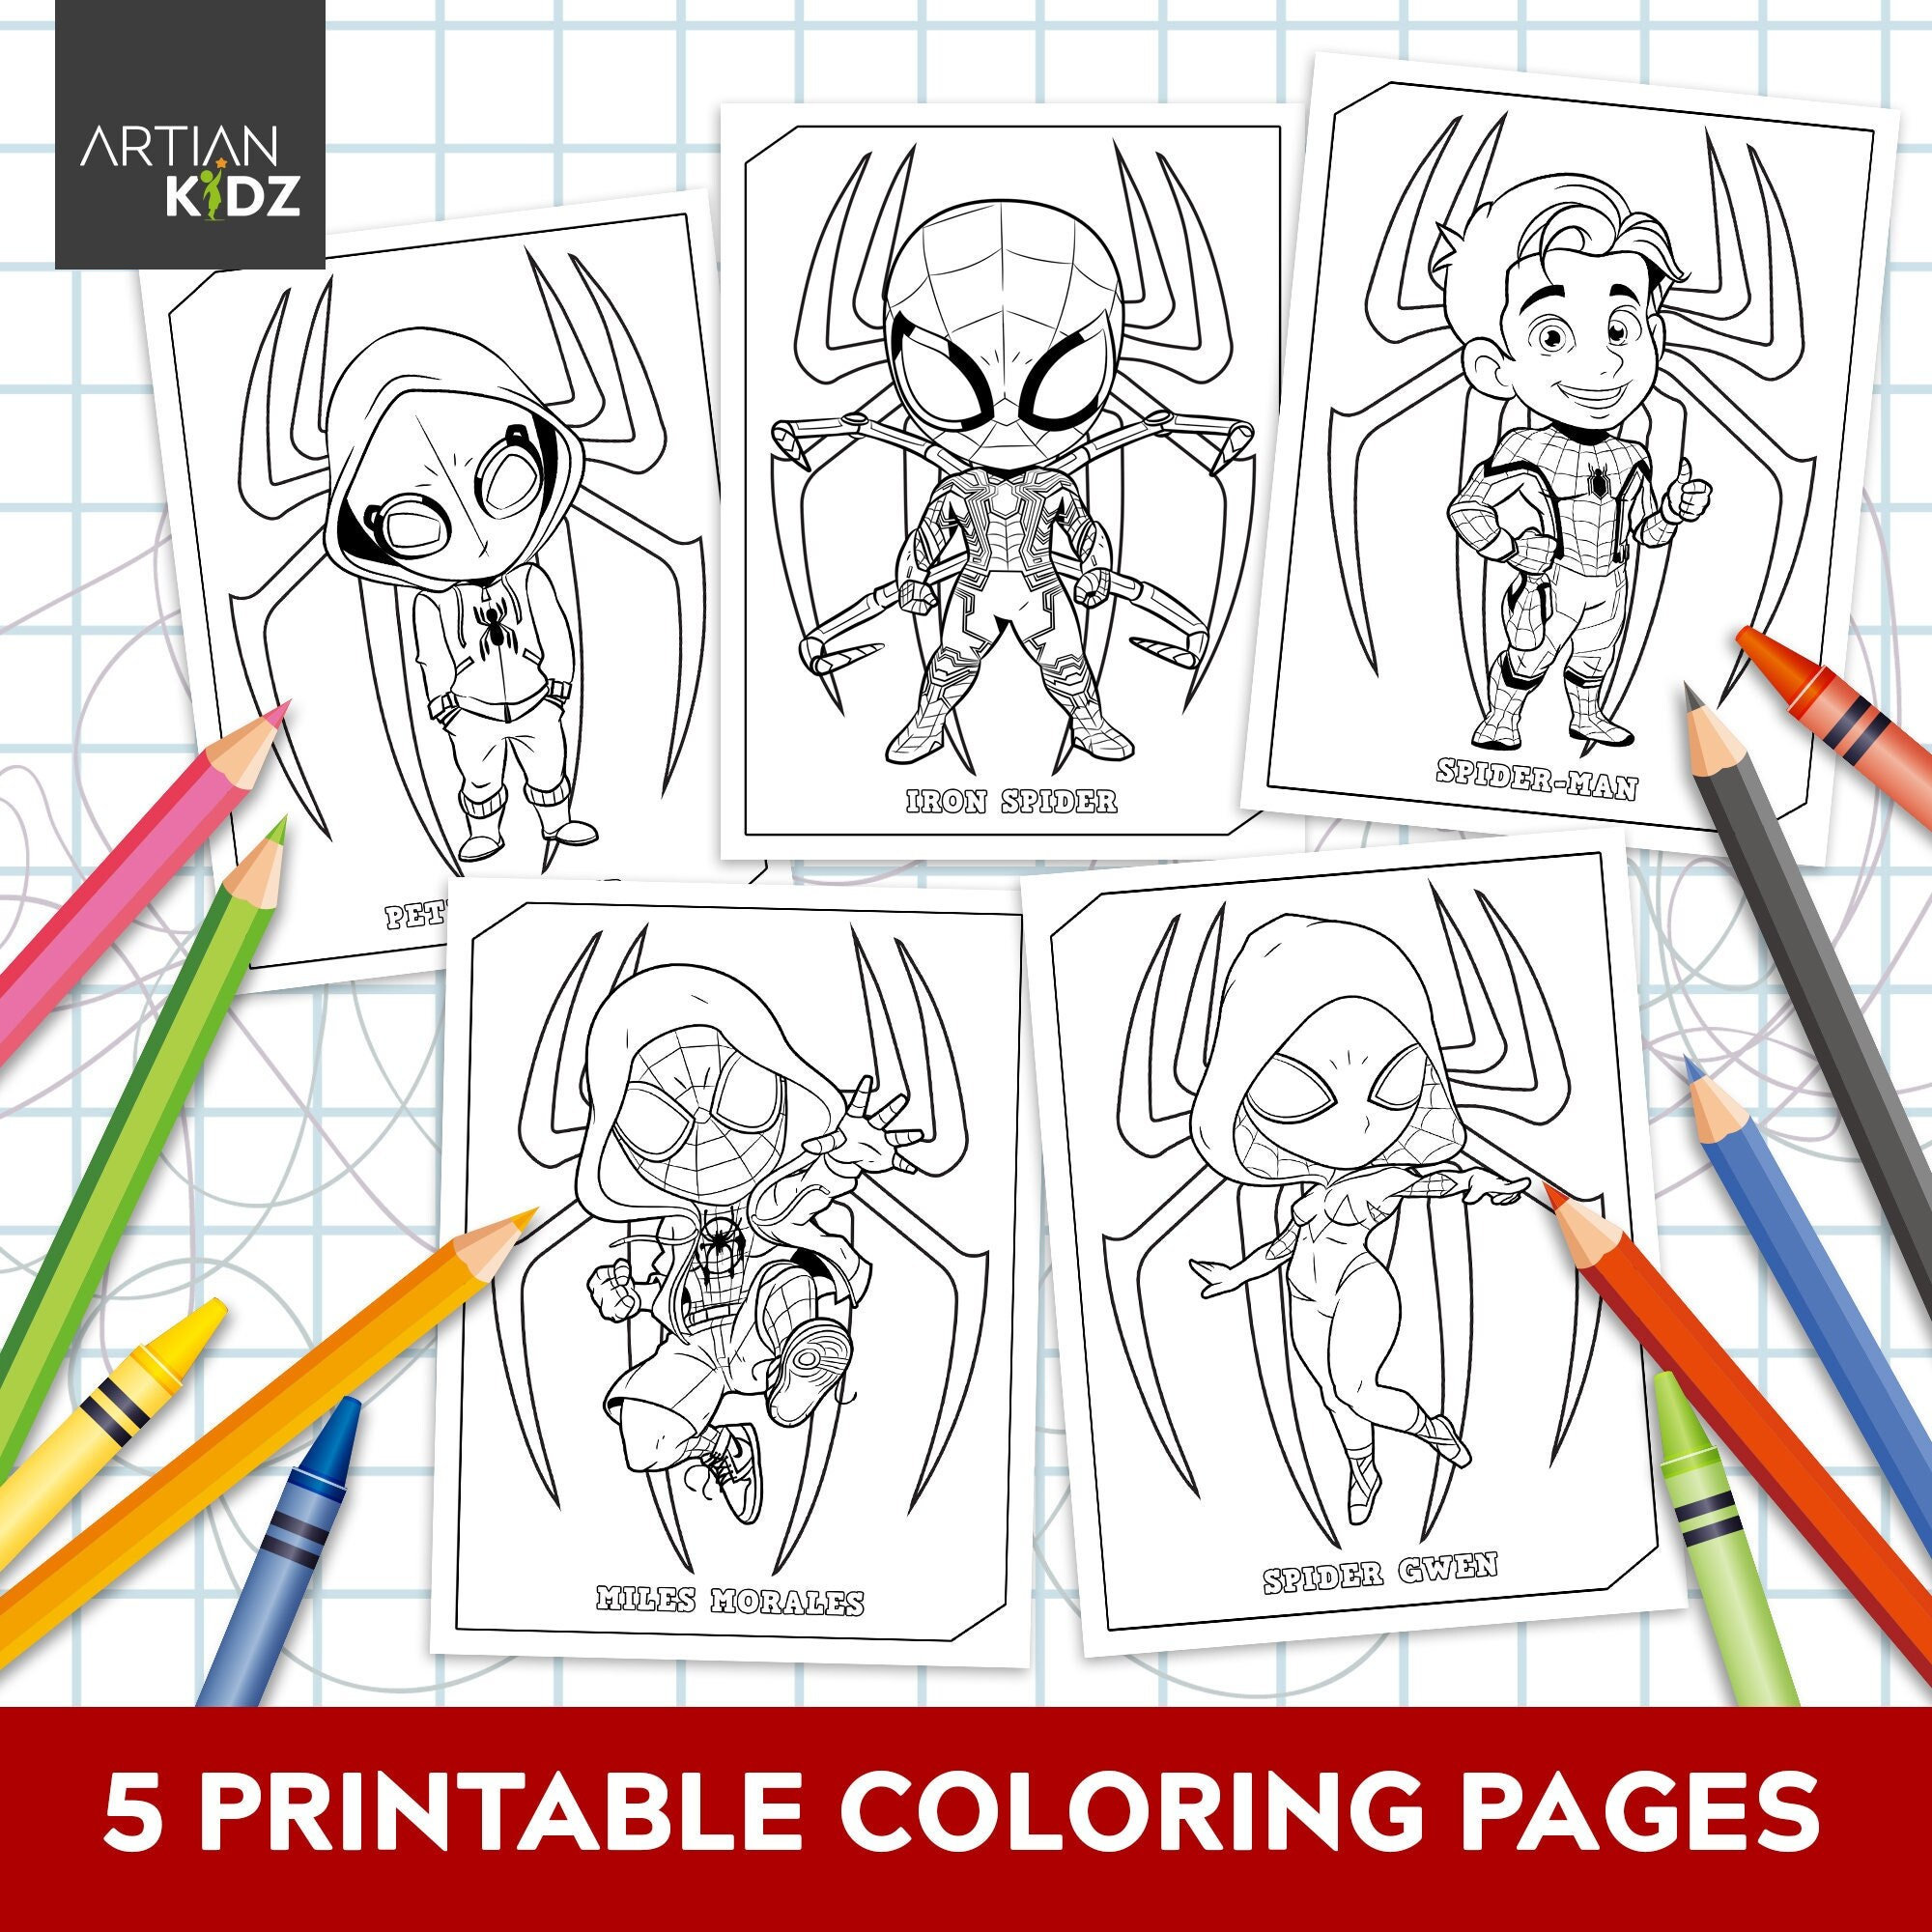 Chibi superhero coloring pages downloadable coloring pages printable coloring pages for kids digital coloring book download now